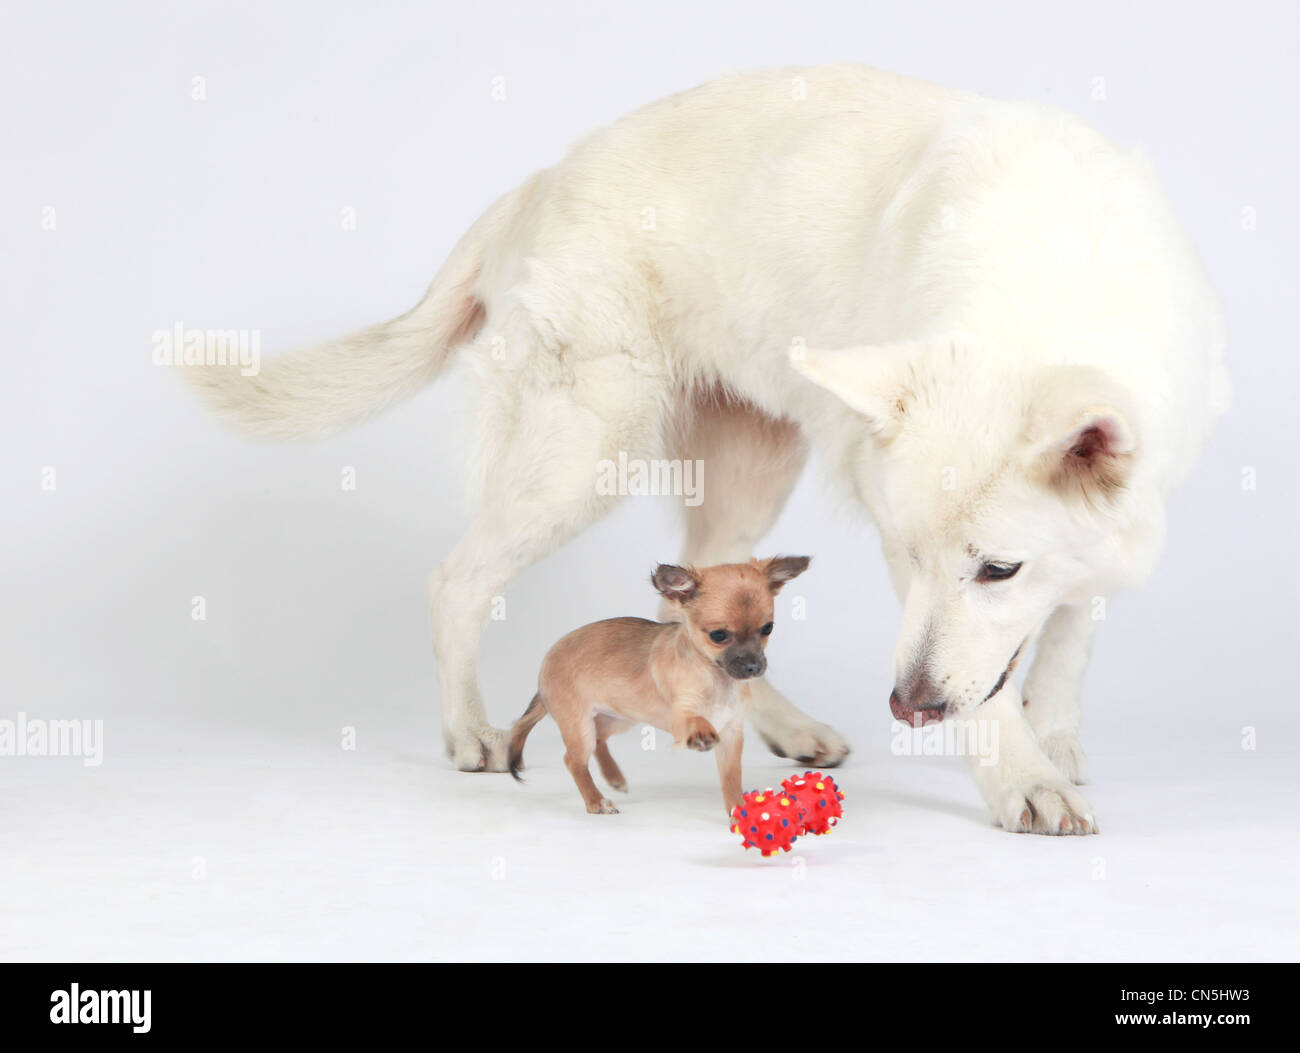 White German Shepherd dog and brown Chihuahua puppy playing together Stock Photo